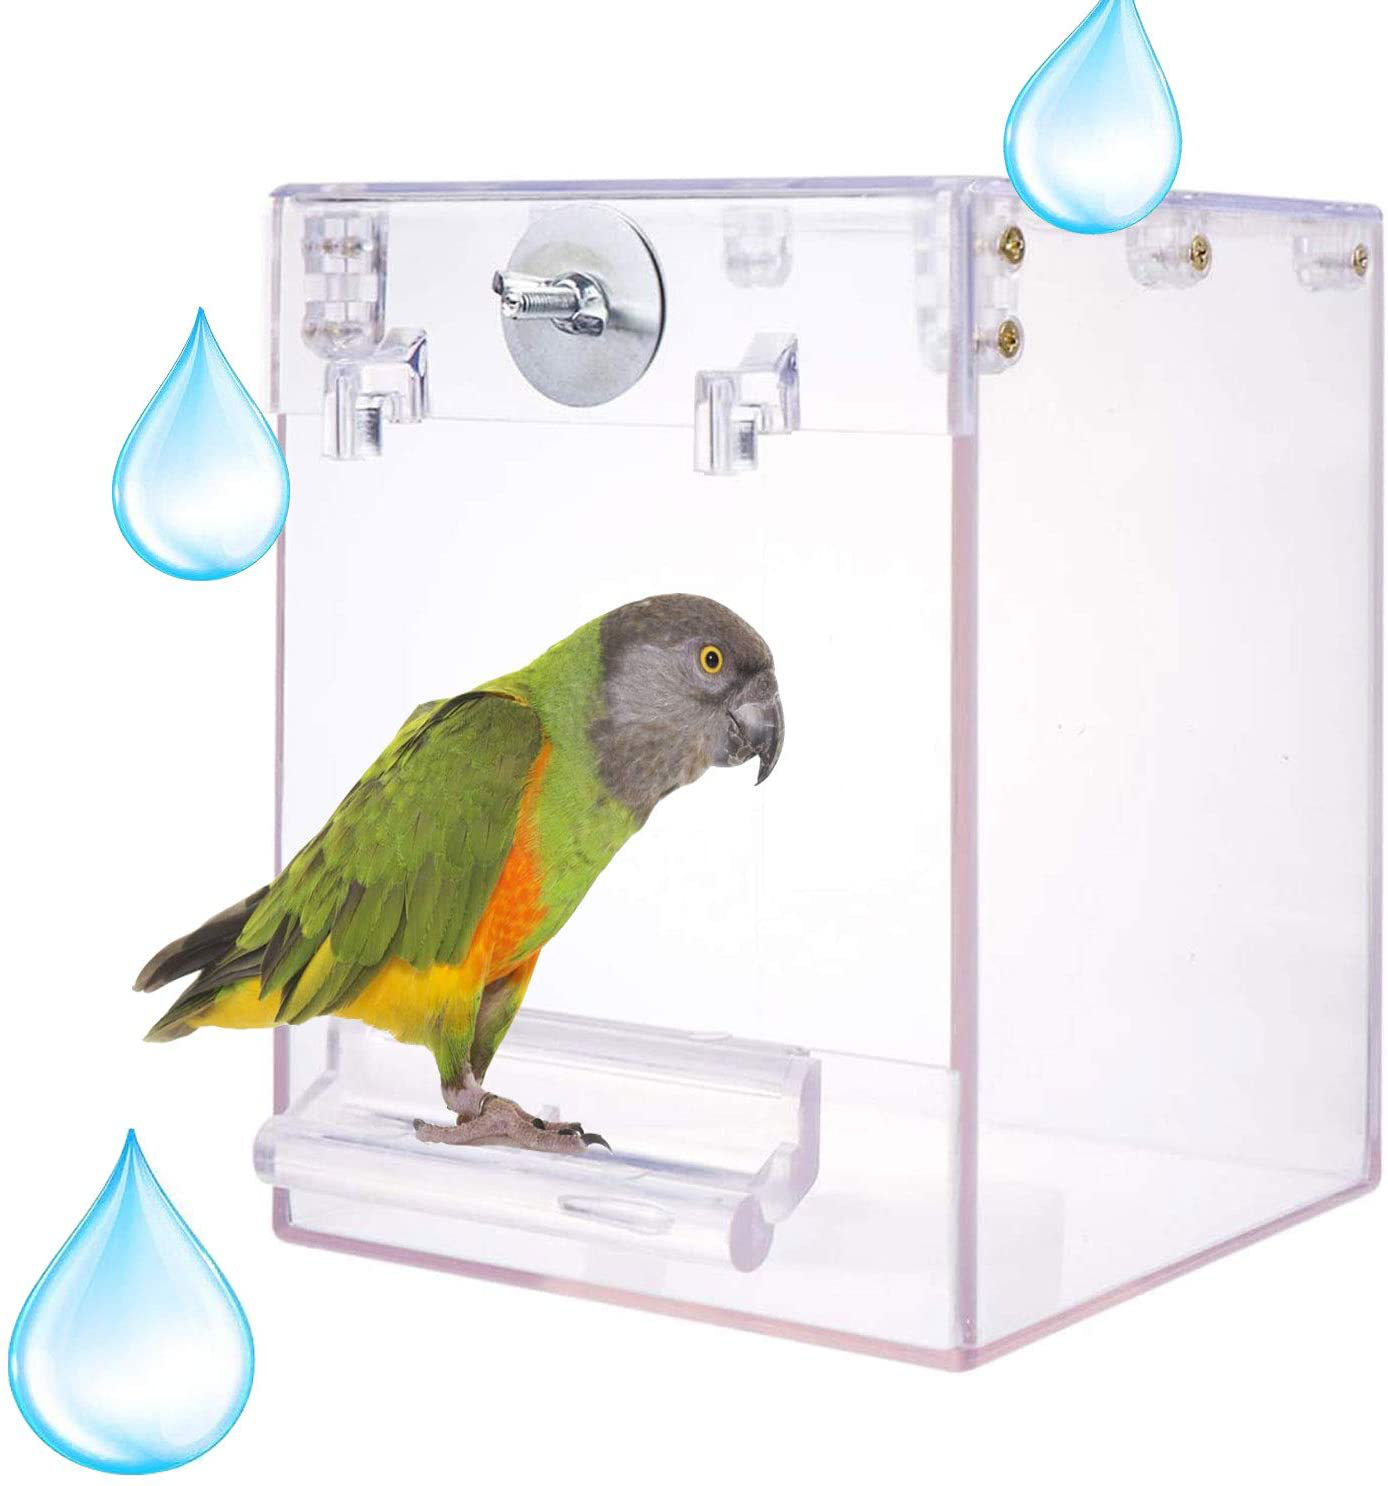 Chenming Bird Bath for Cage,Parrot Birdbath Shower Accessories,No-Leakage Design Hanging Bathtub Tube Shower Box Bowl Cage Accessory for Pet Birds Canary Lovebirds Budgies